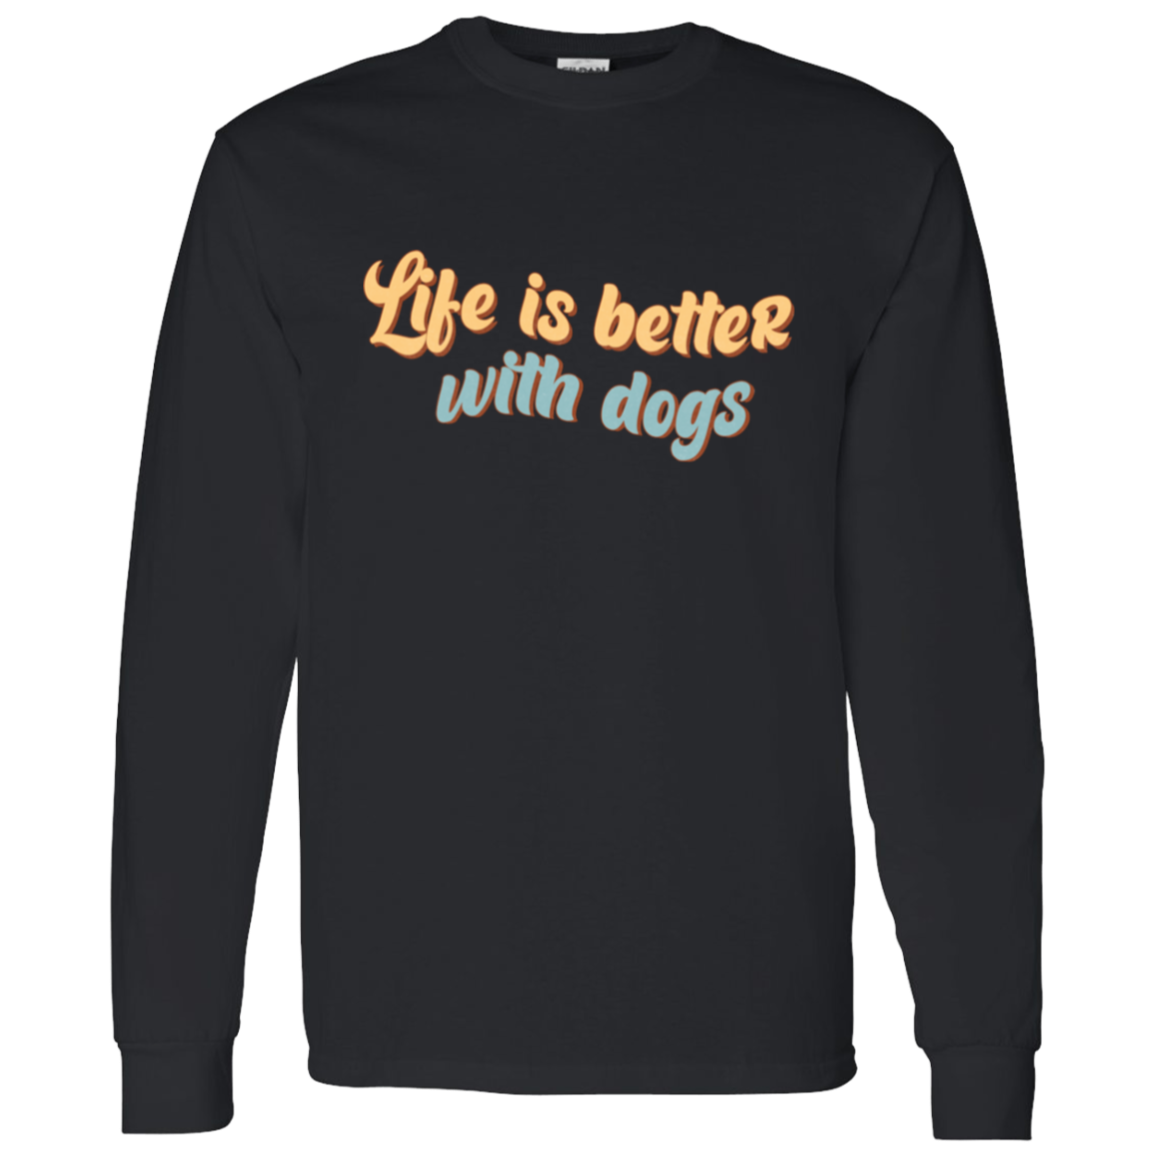 Life is Better with Dogs Long Sleeve T-Shirt